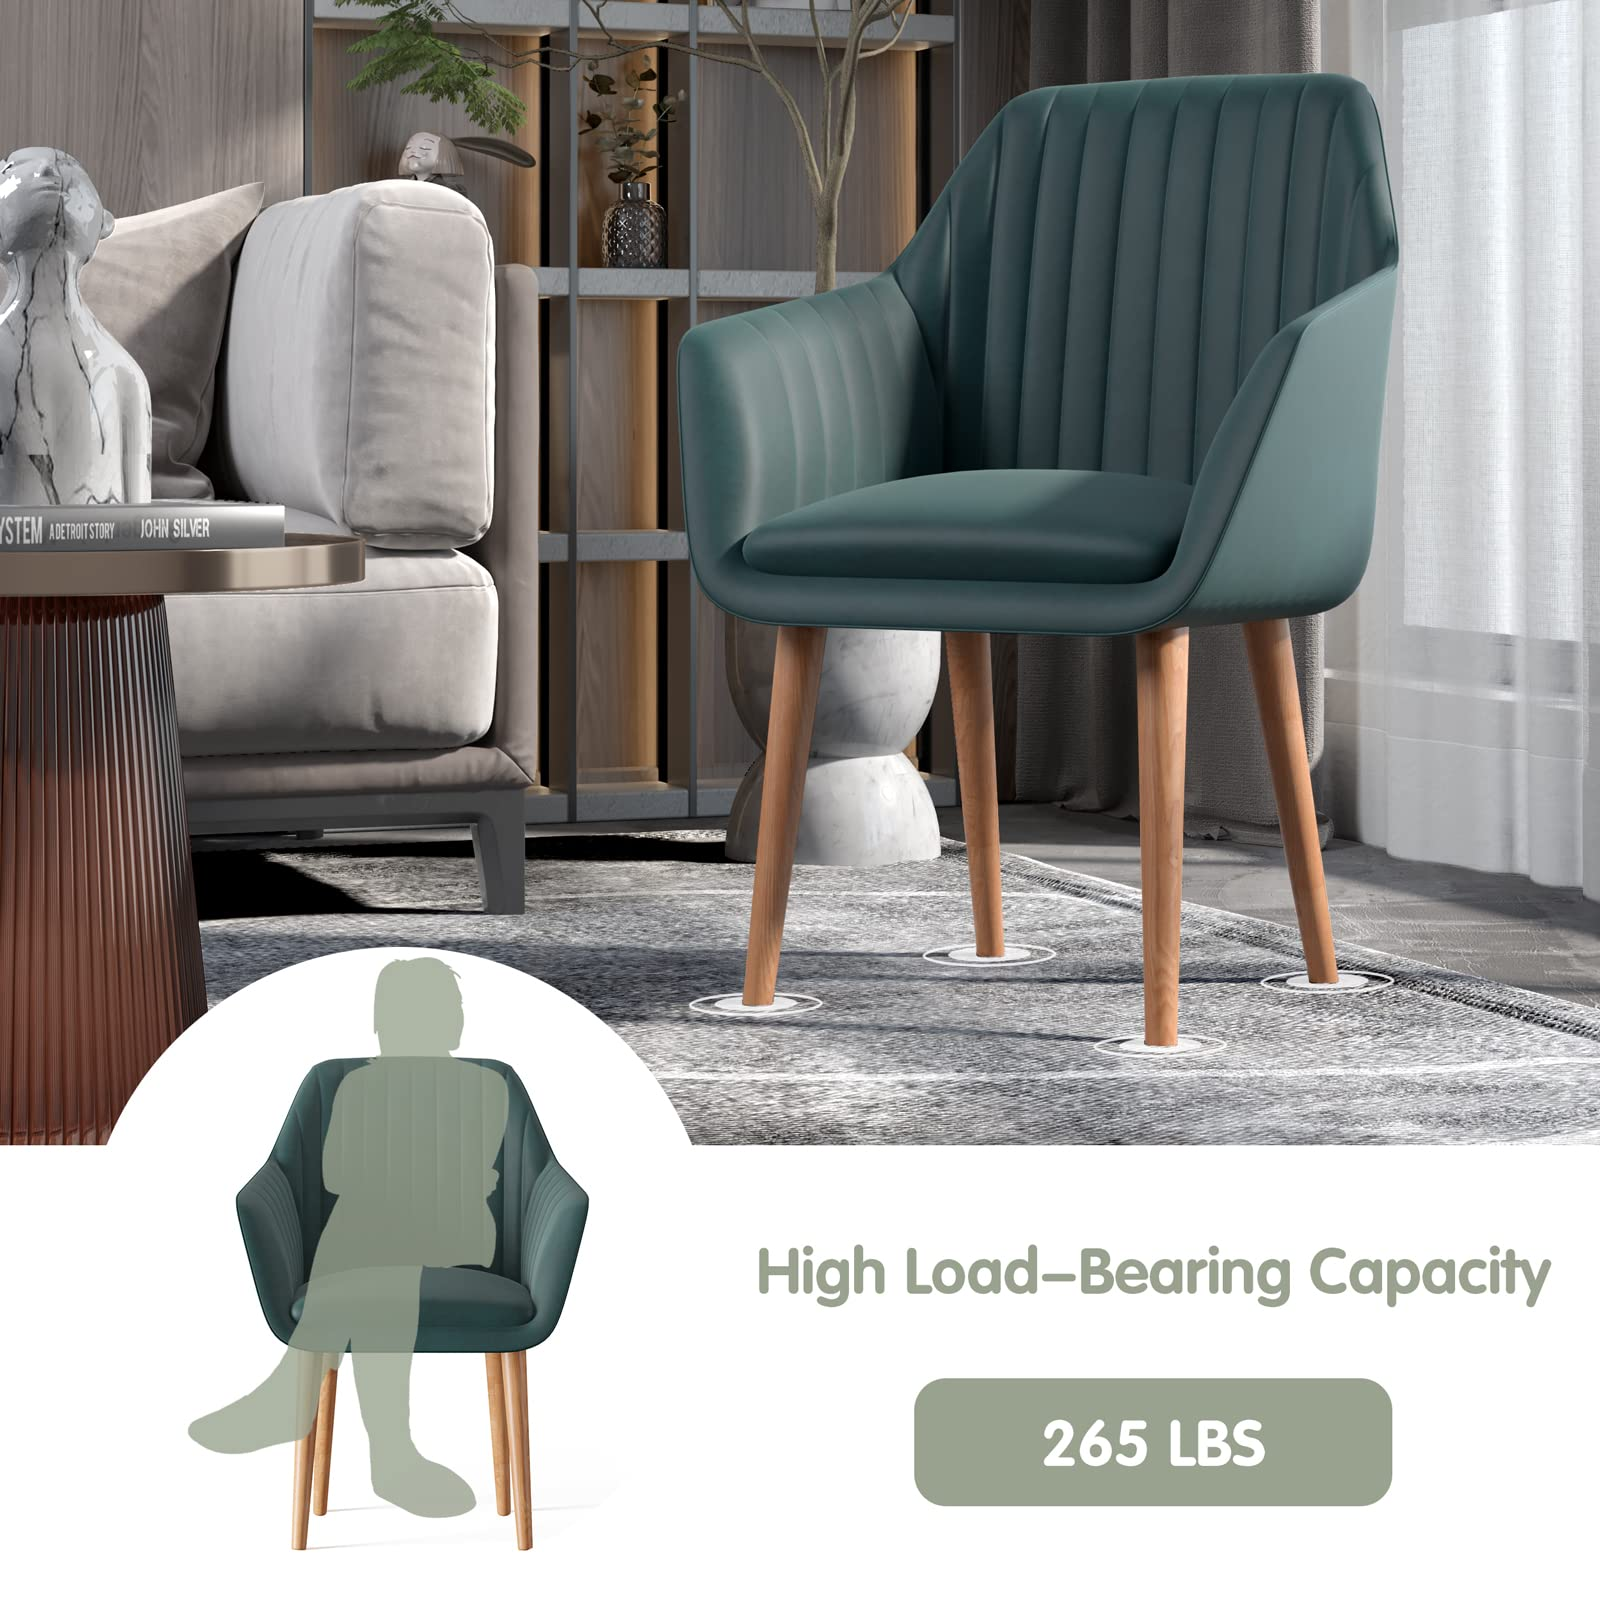 Giantex Upholstered Dining Chairs